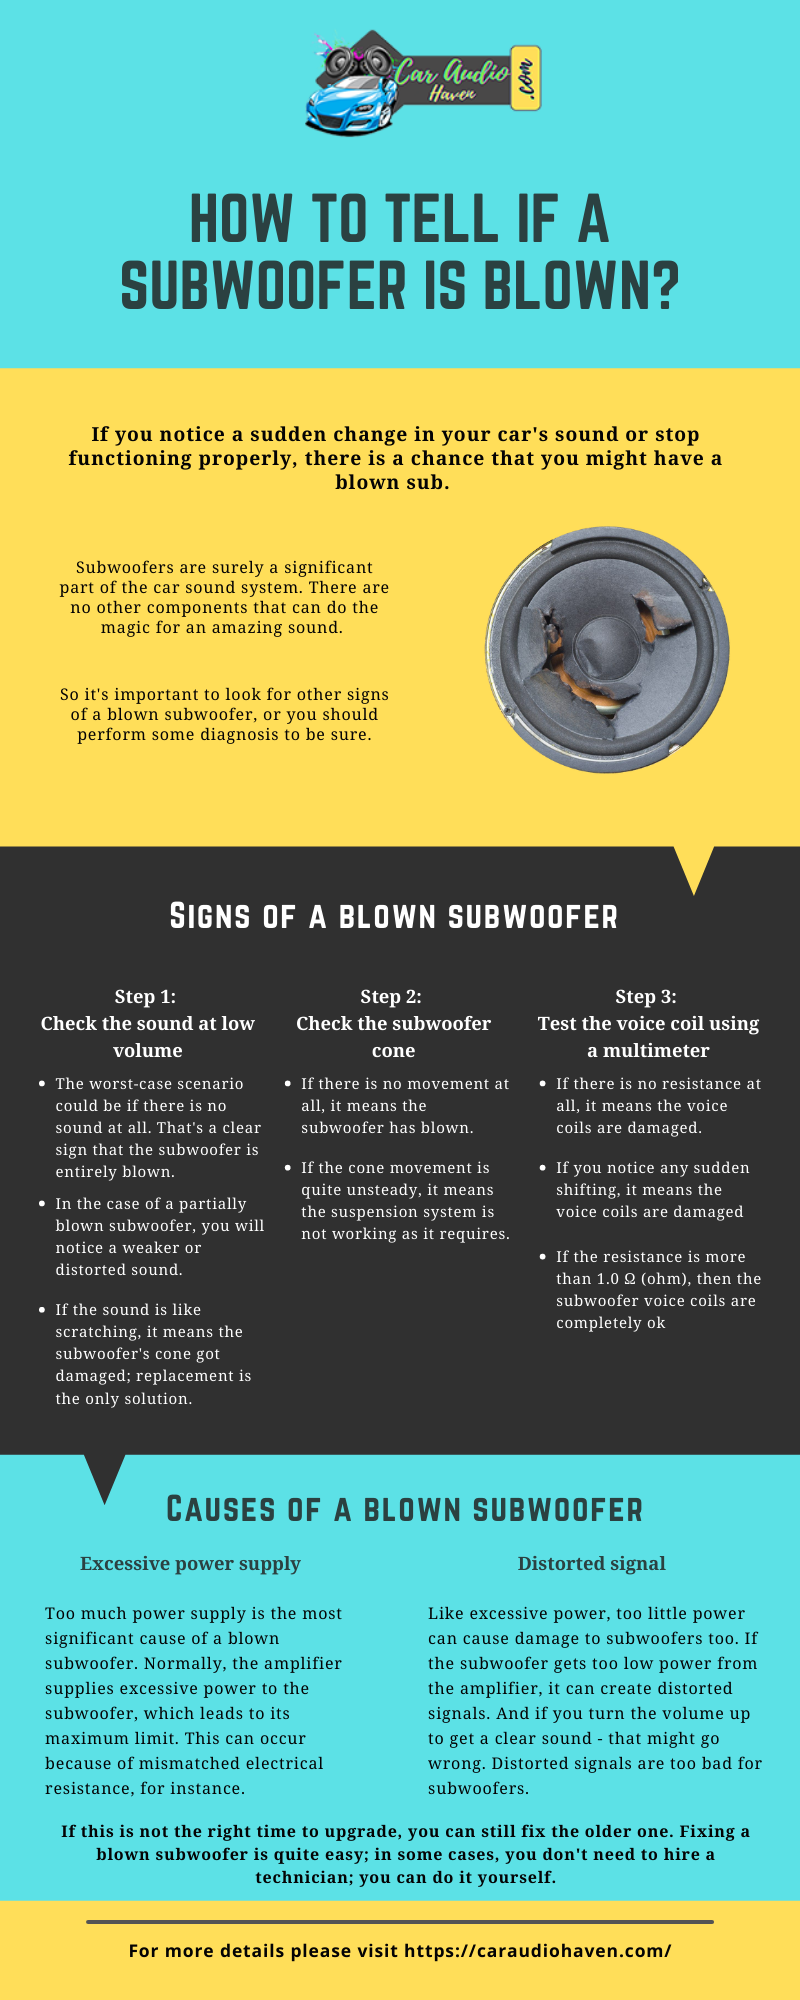 How to tell if a subwoofer is blown